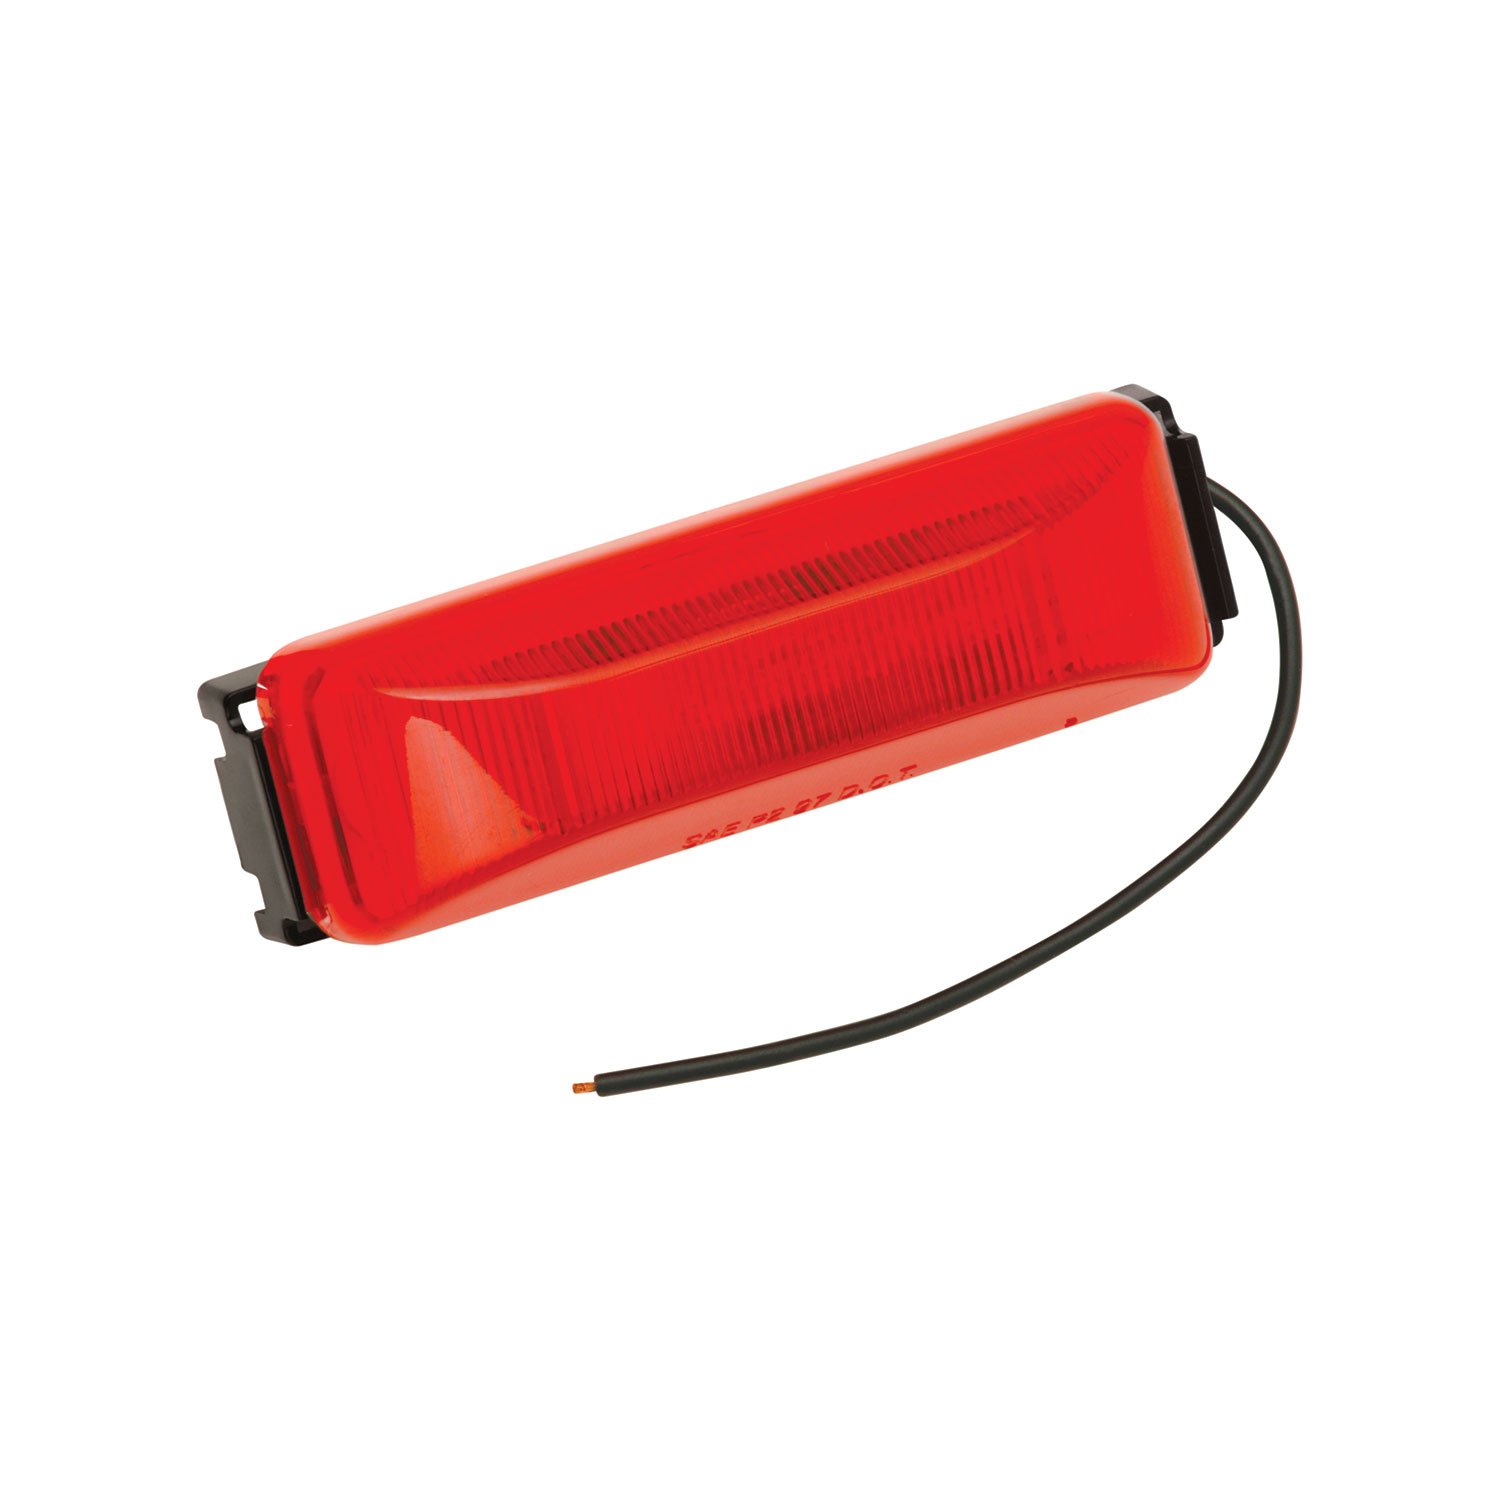 Bargman 42-38-033 Red LED Clearance Light with Black Base and Pigtail